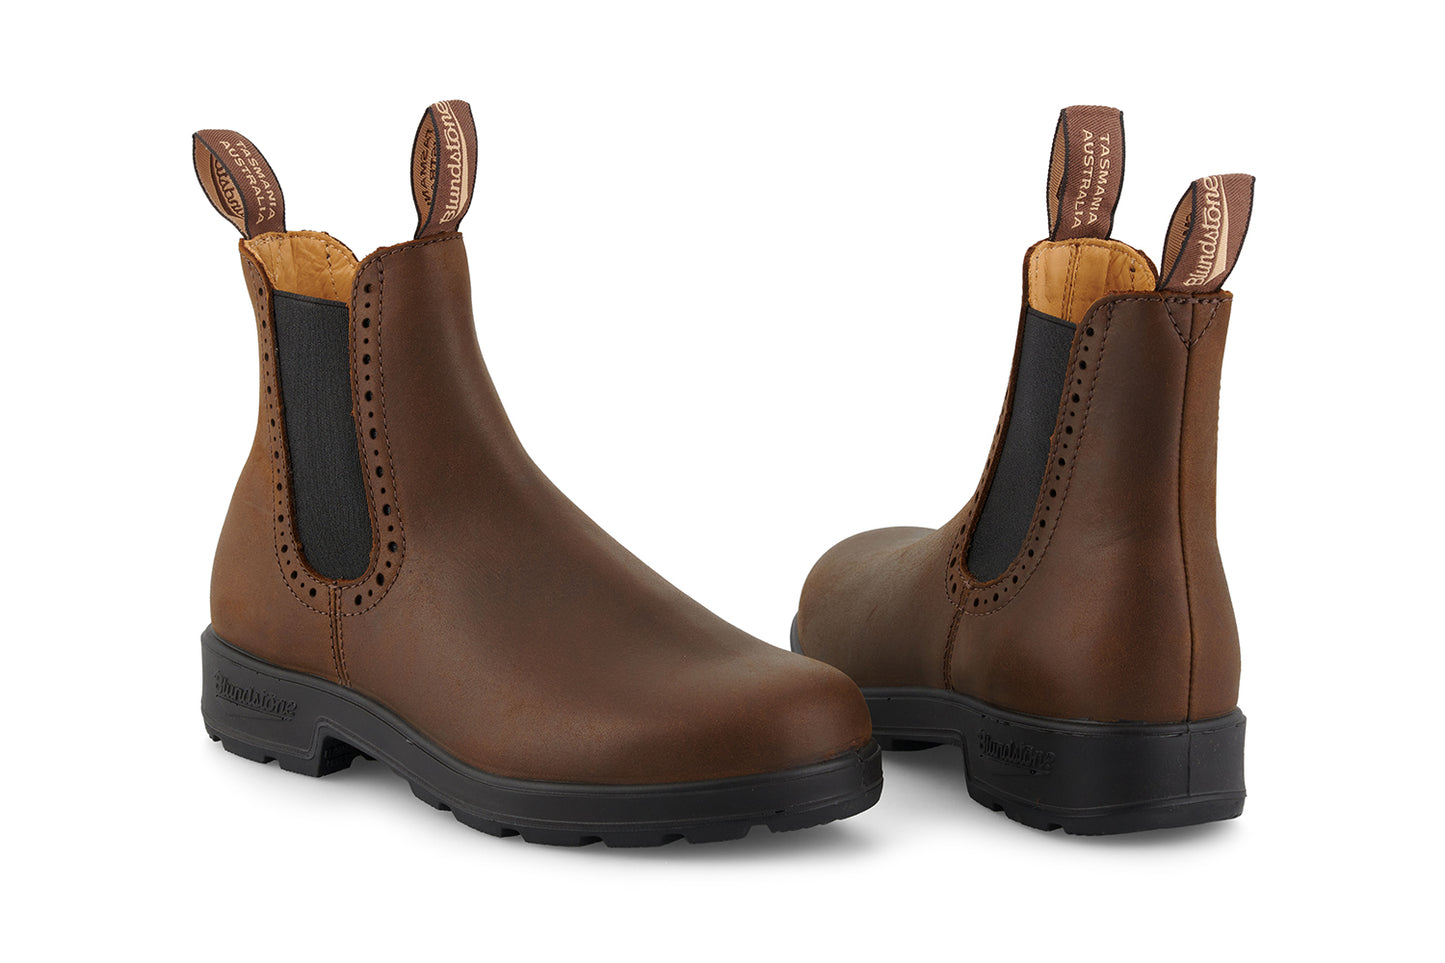 Blundstone 2151 Antique Brown Boots